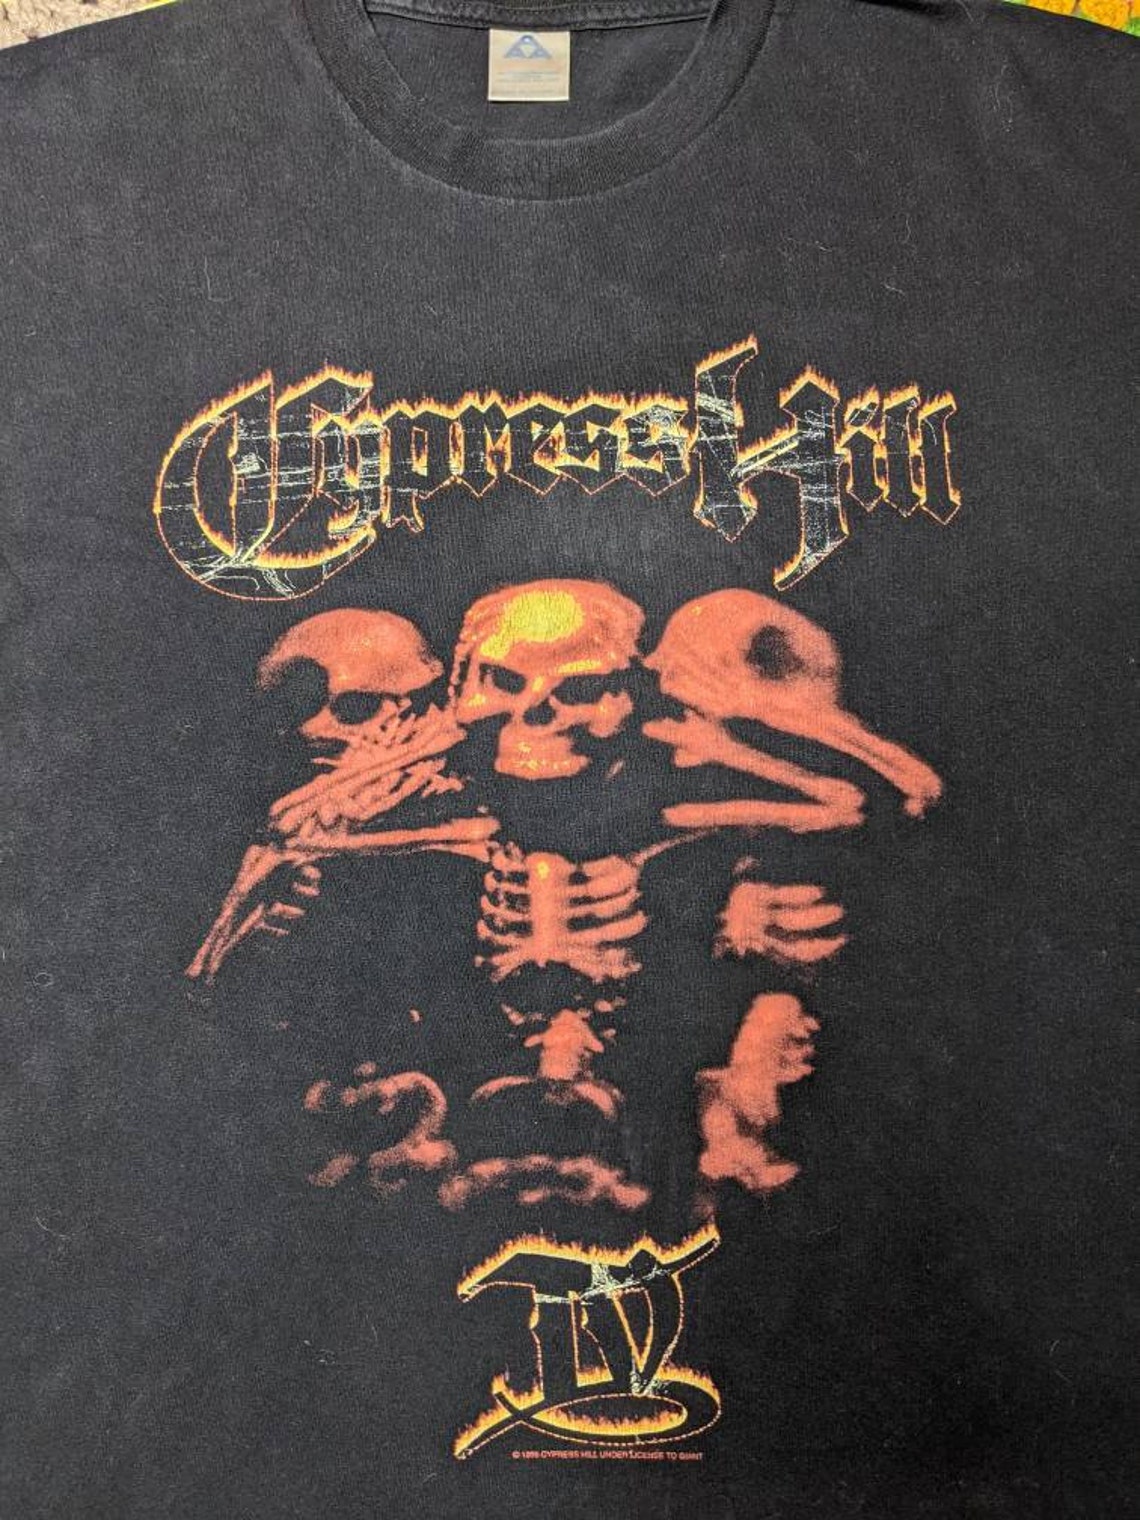 1998 Cypress Hill IV Checkmate Vintage T-shirt | Etsy